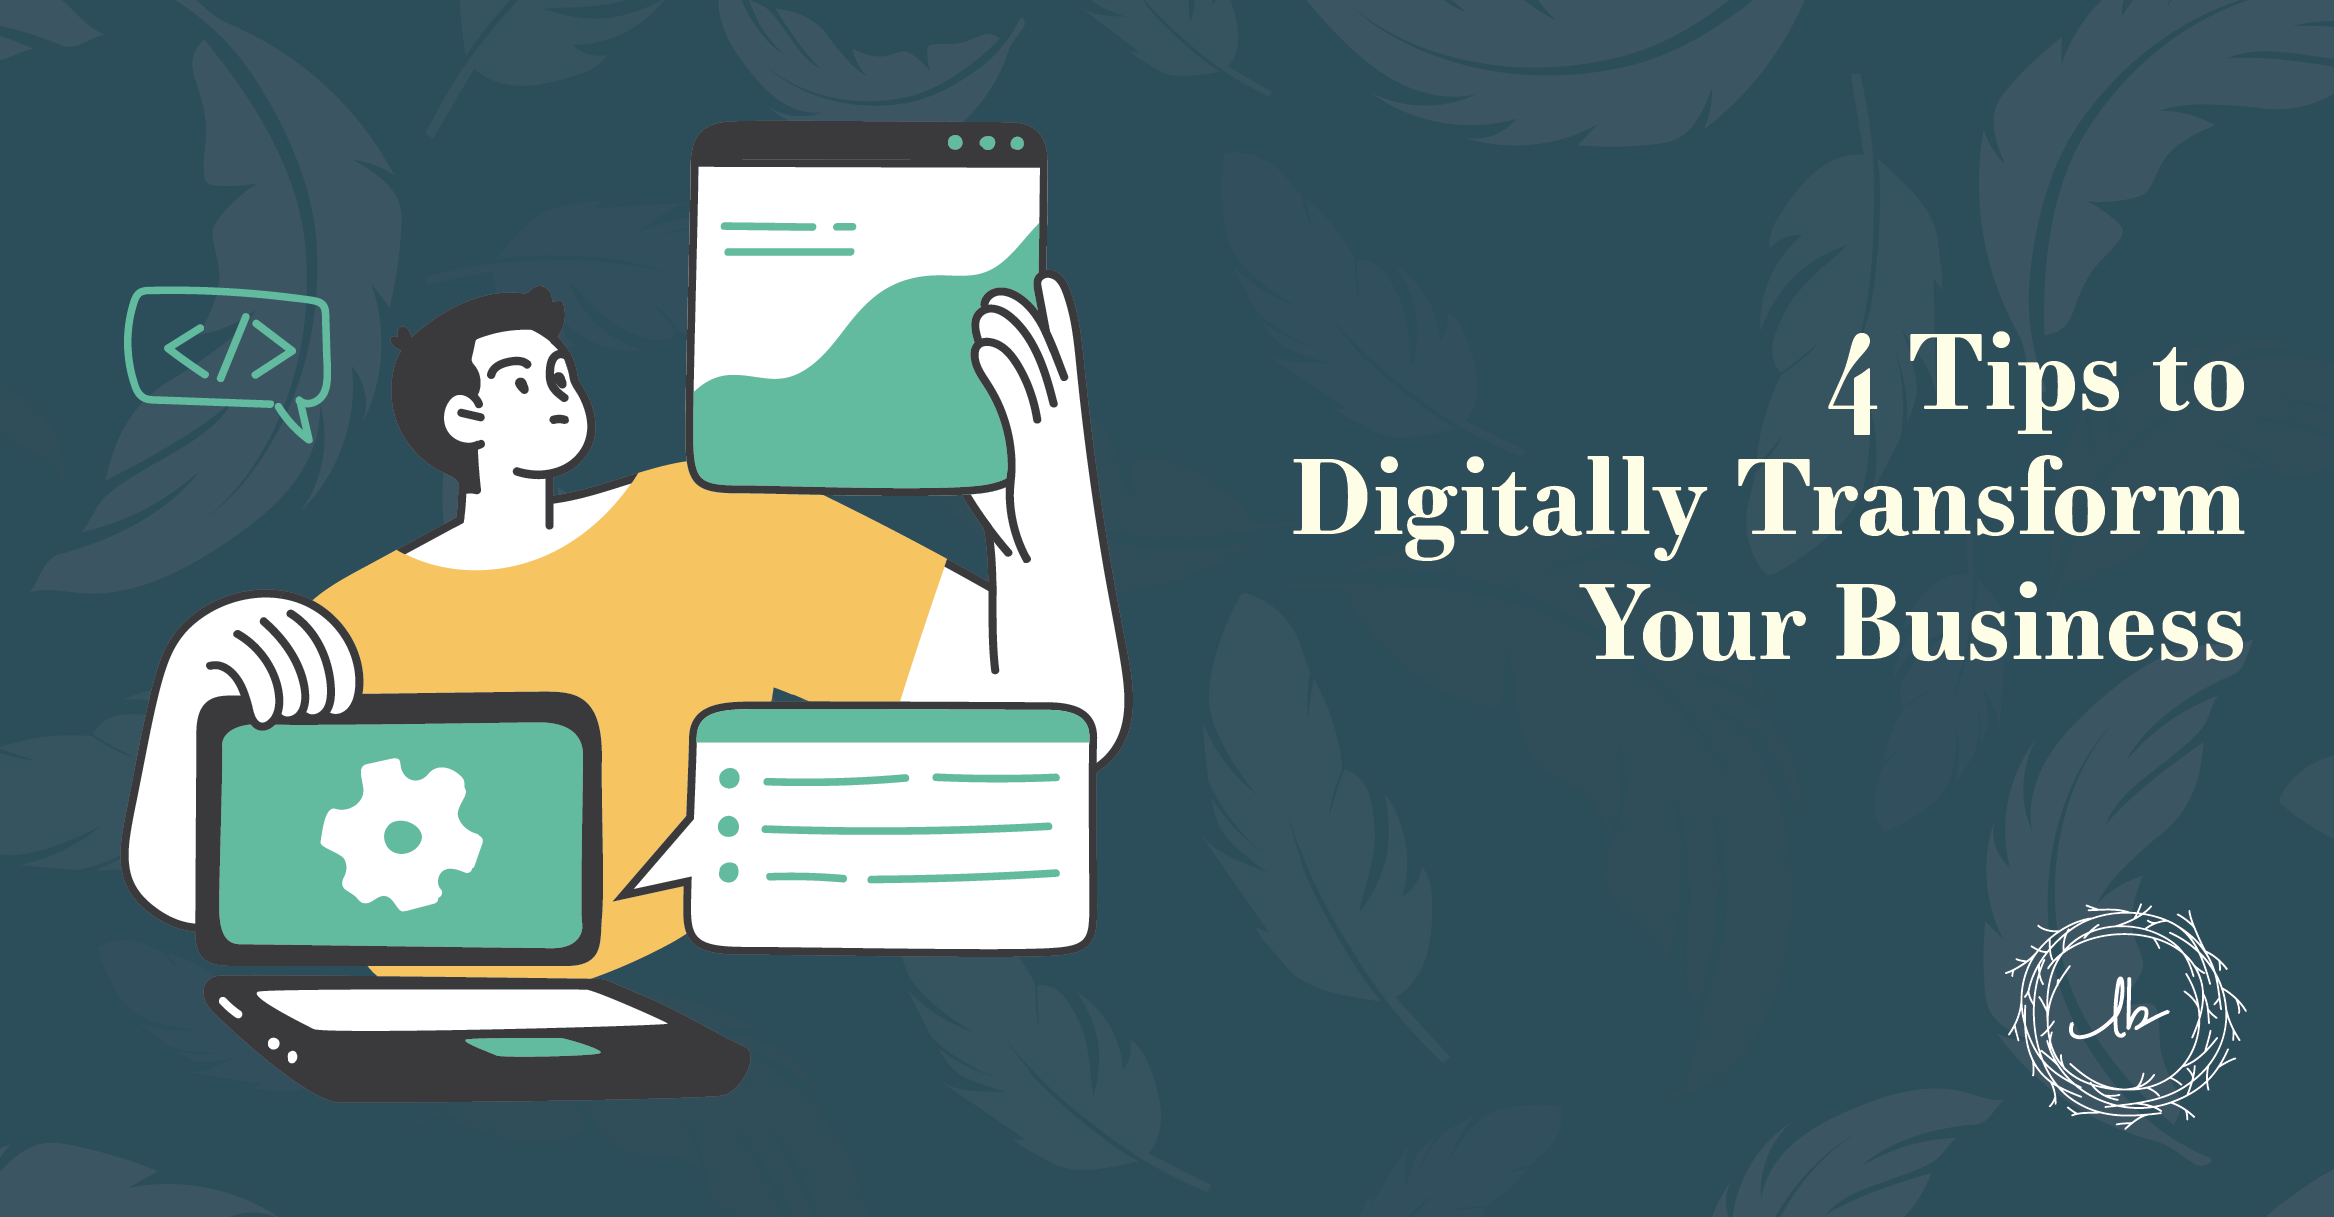 4 Tips to Digitally Transform Your Business